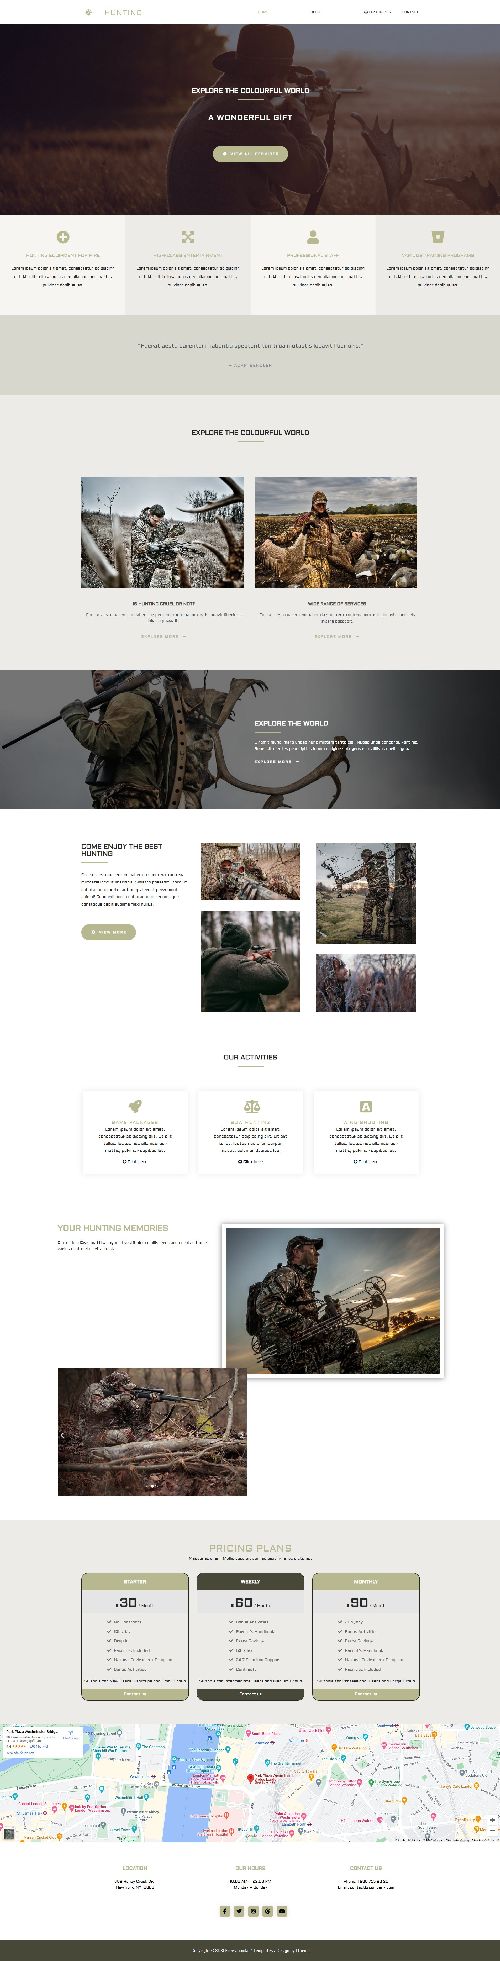 LT Hunting - Hunting Services Activities Joomla 4 Template